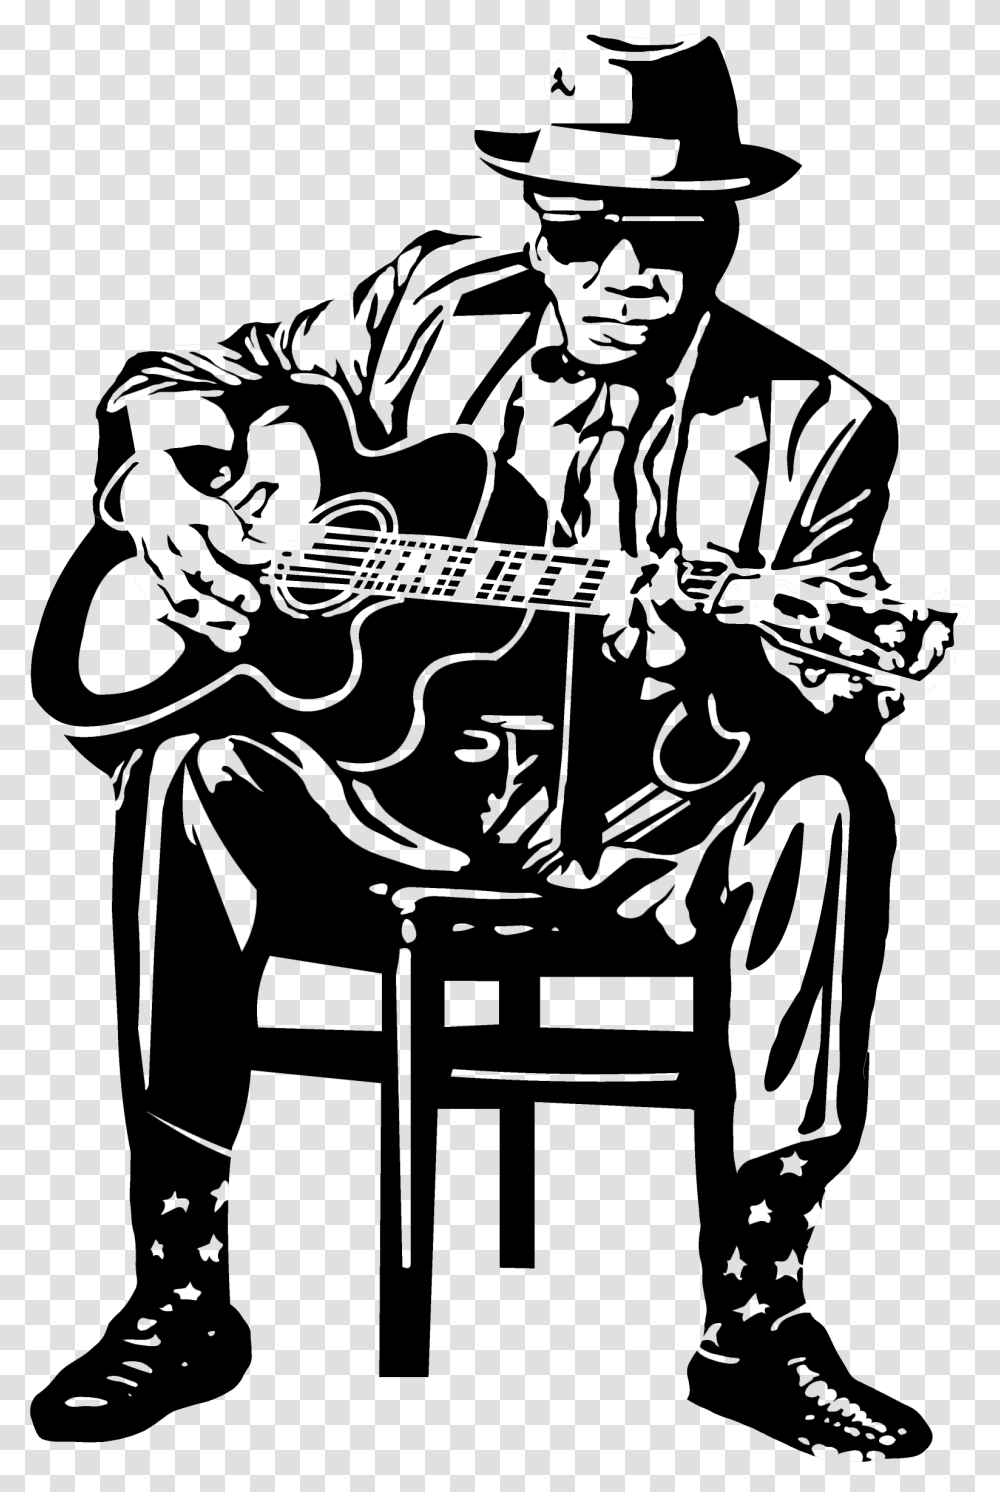 Guitar Acoustic Blues Musician Image High Quality John Lee Hooker Patch, Furniture, Silhouette, Person, People Transparent Png